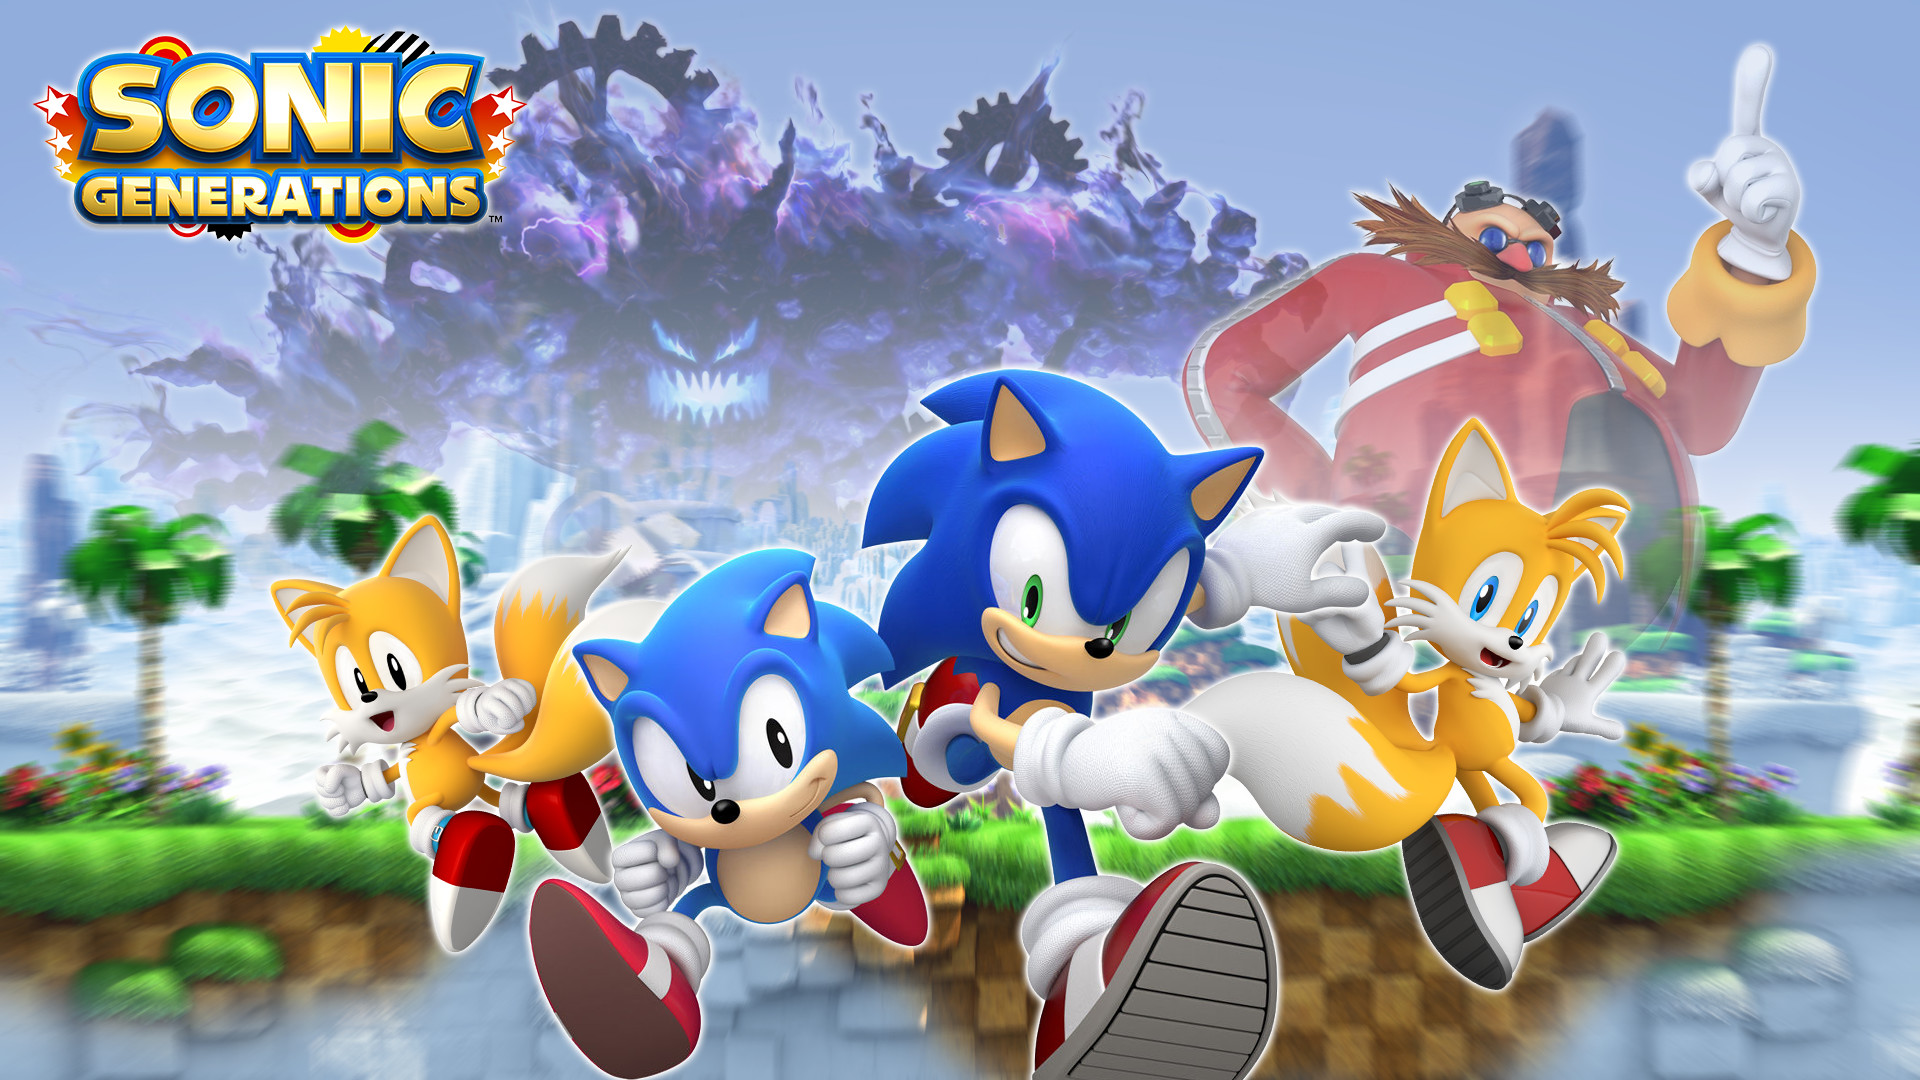 1920x1080 Sonic Generations Wallpaper by SonicGenerationsPlz Sonic Generations  Wallpaper by SonicGenerationsPlz